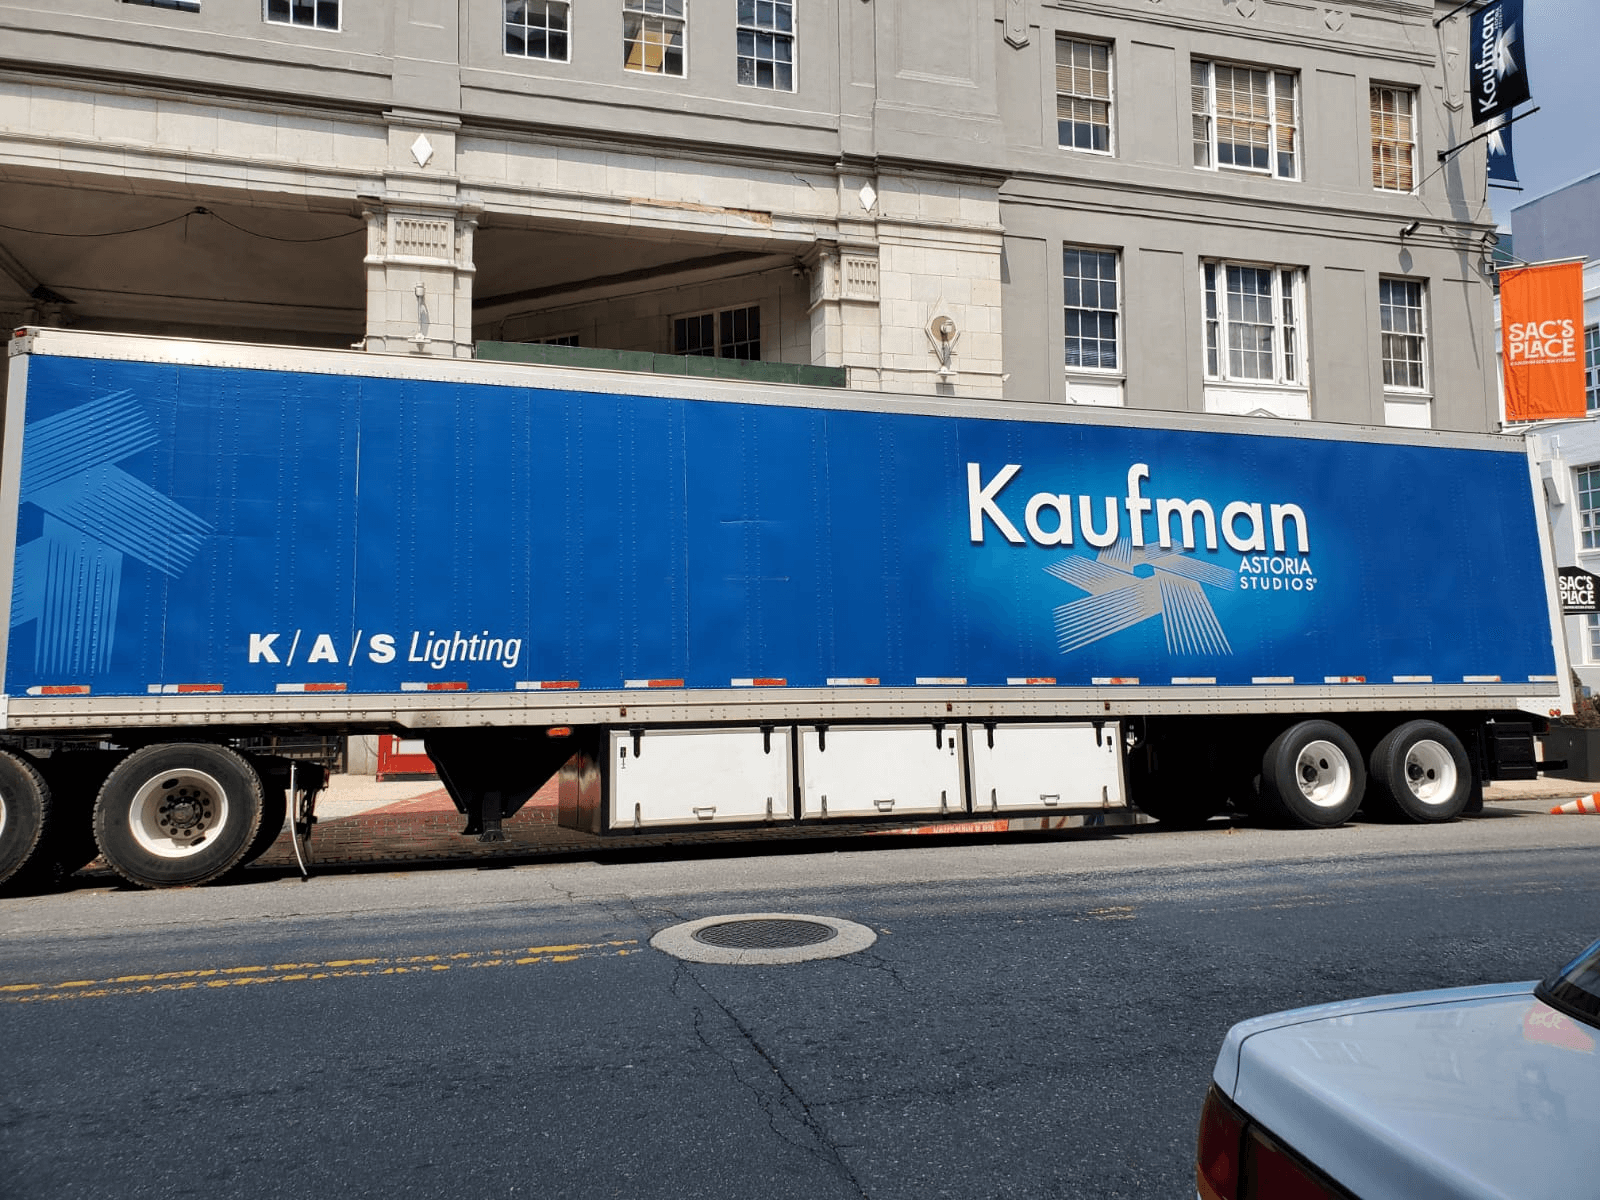 A truck parked on the street with the words Kaufman written on the side